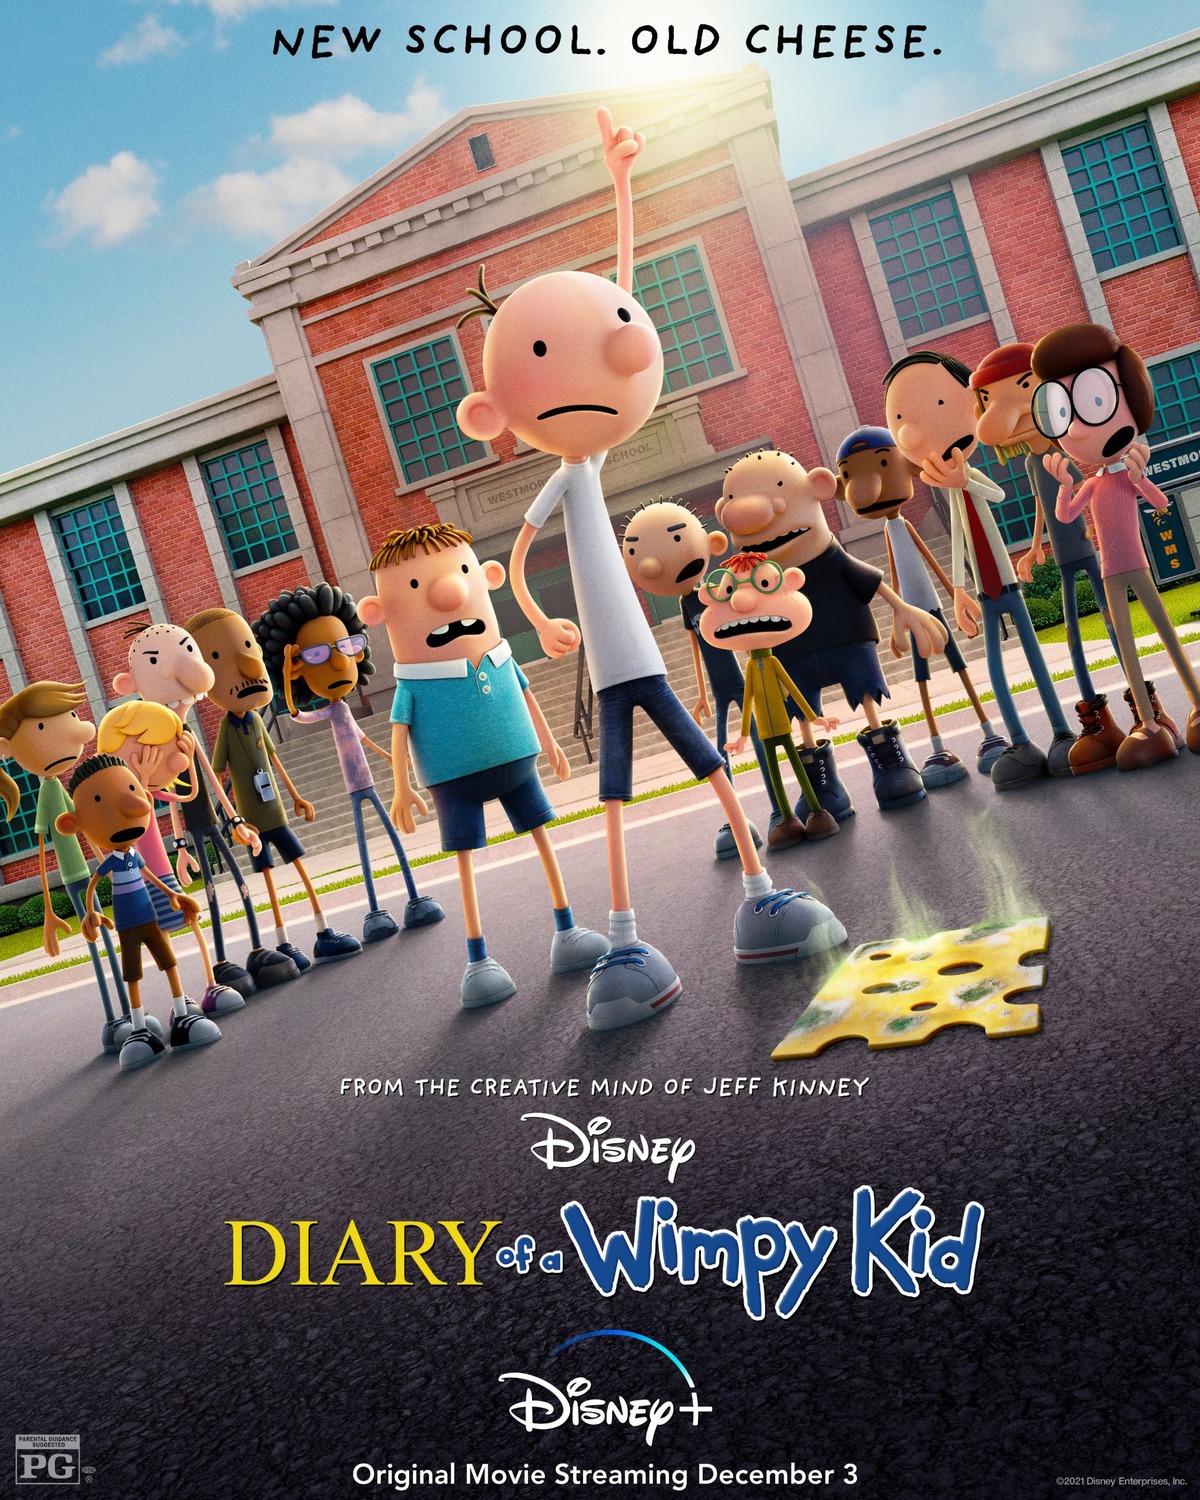 Extra Large Movie Poster Image for Diary of a Wimpy Kid (#2 of 2)